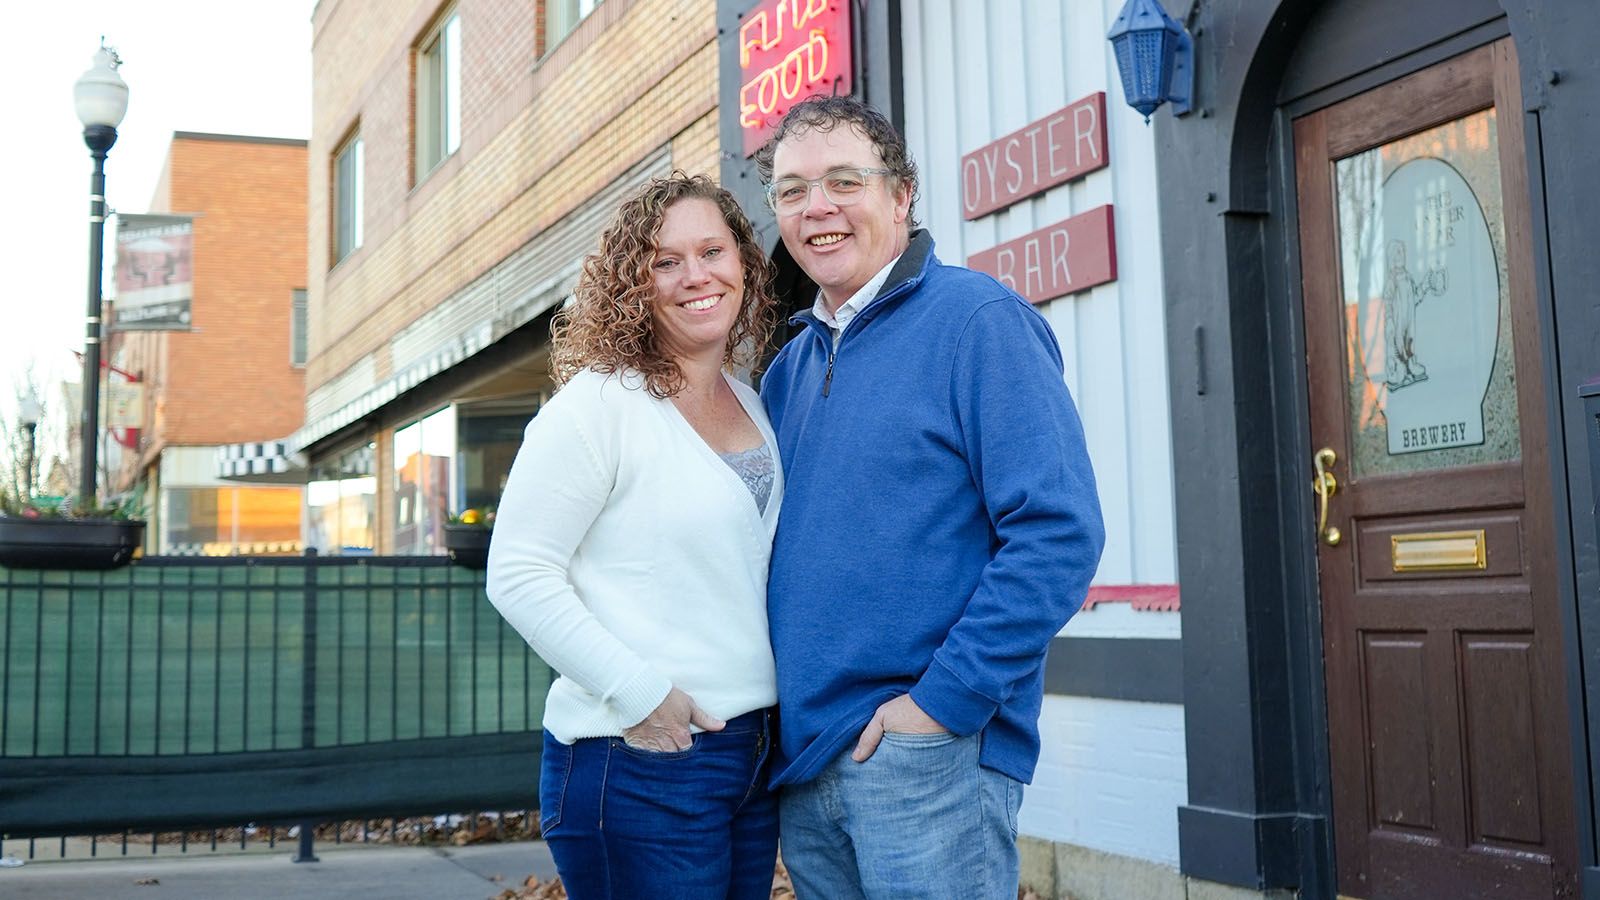 Tony and Kara West have taken ownership of The Oyster Bar.